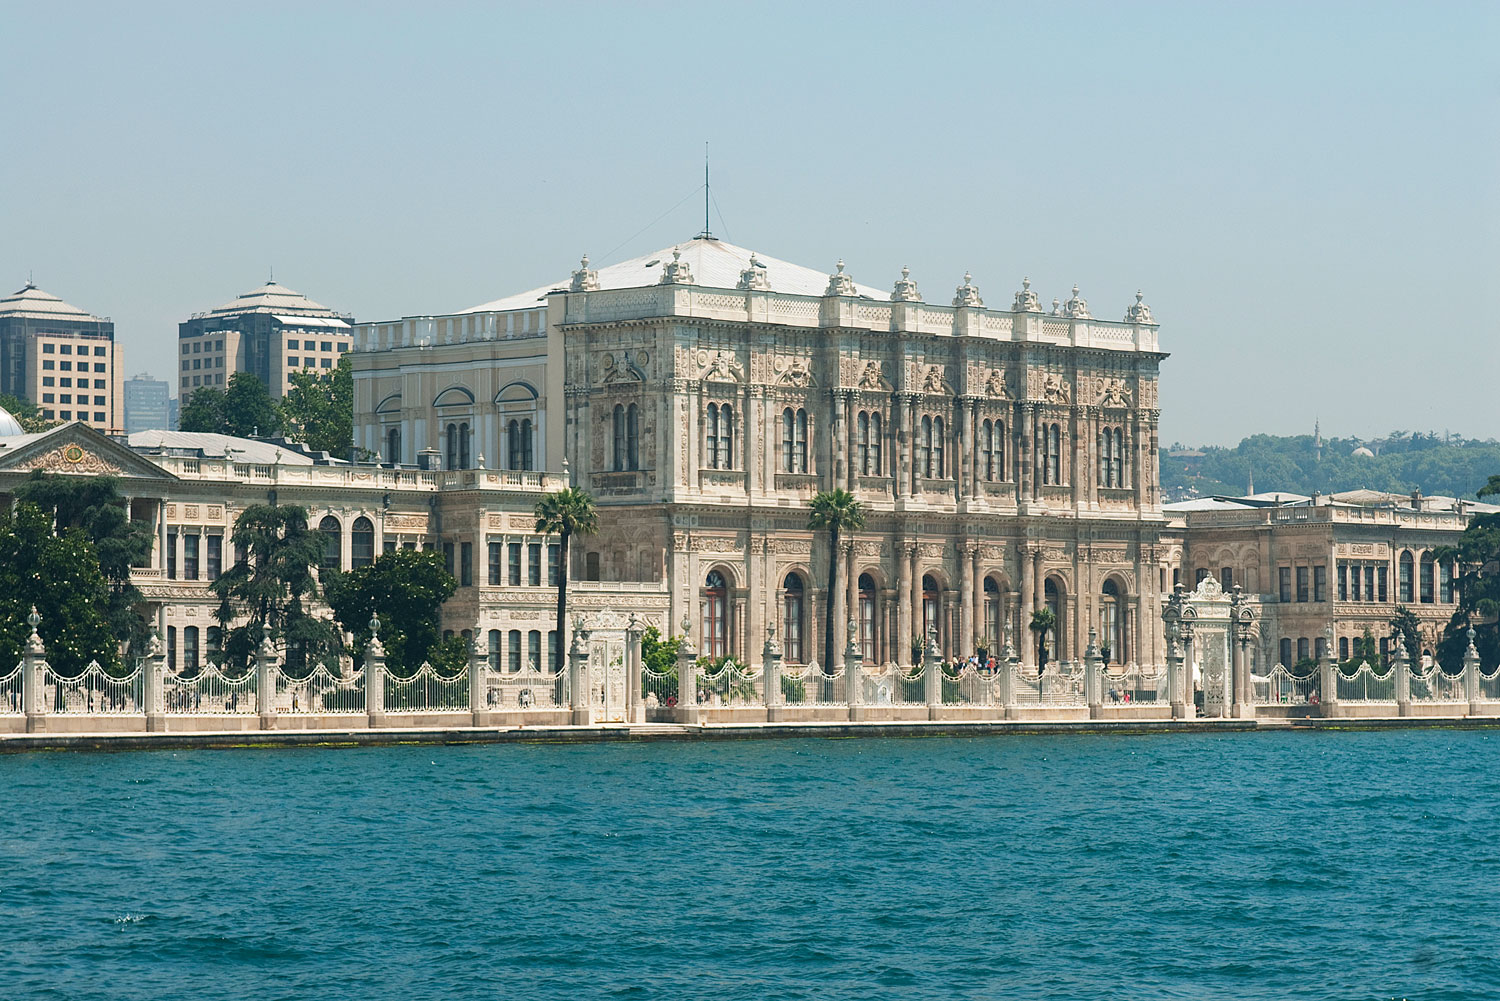 http://www.net4info.eu/albums/albums/userpics/10003/Dolmabahce_Palace.jpg